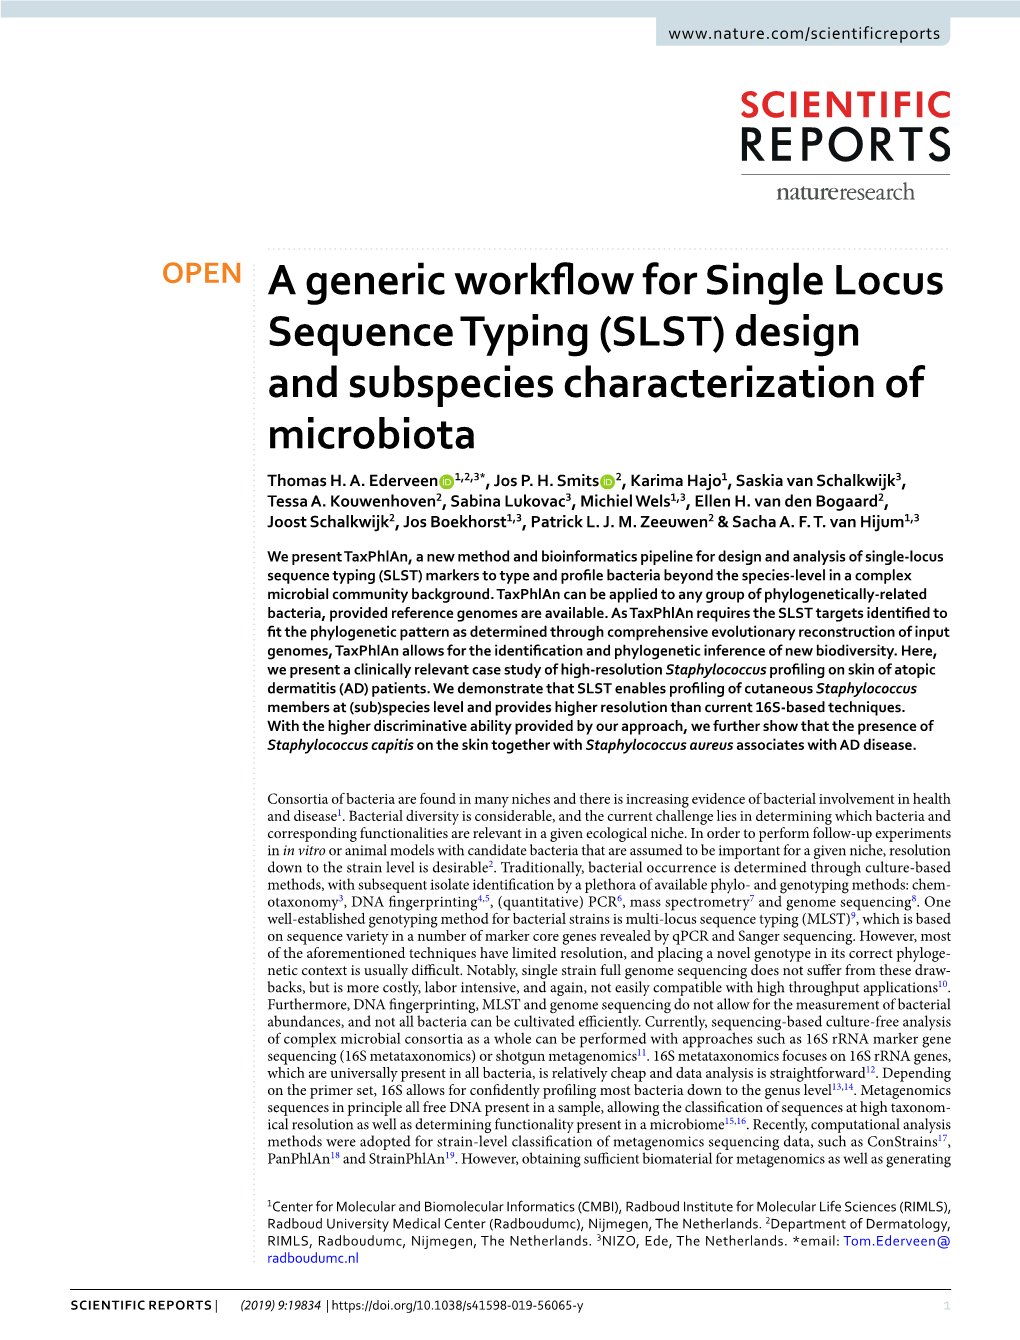 A Generic Workflow for Single Locus Sequence Typing